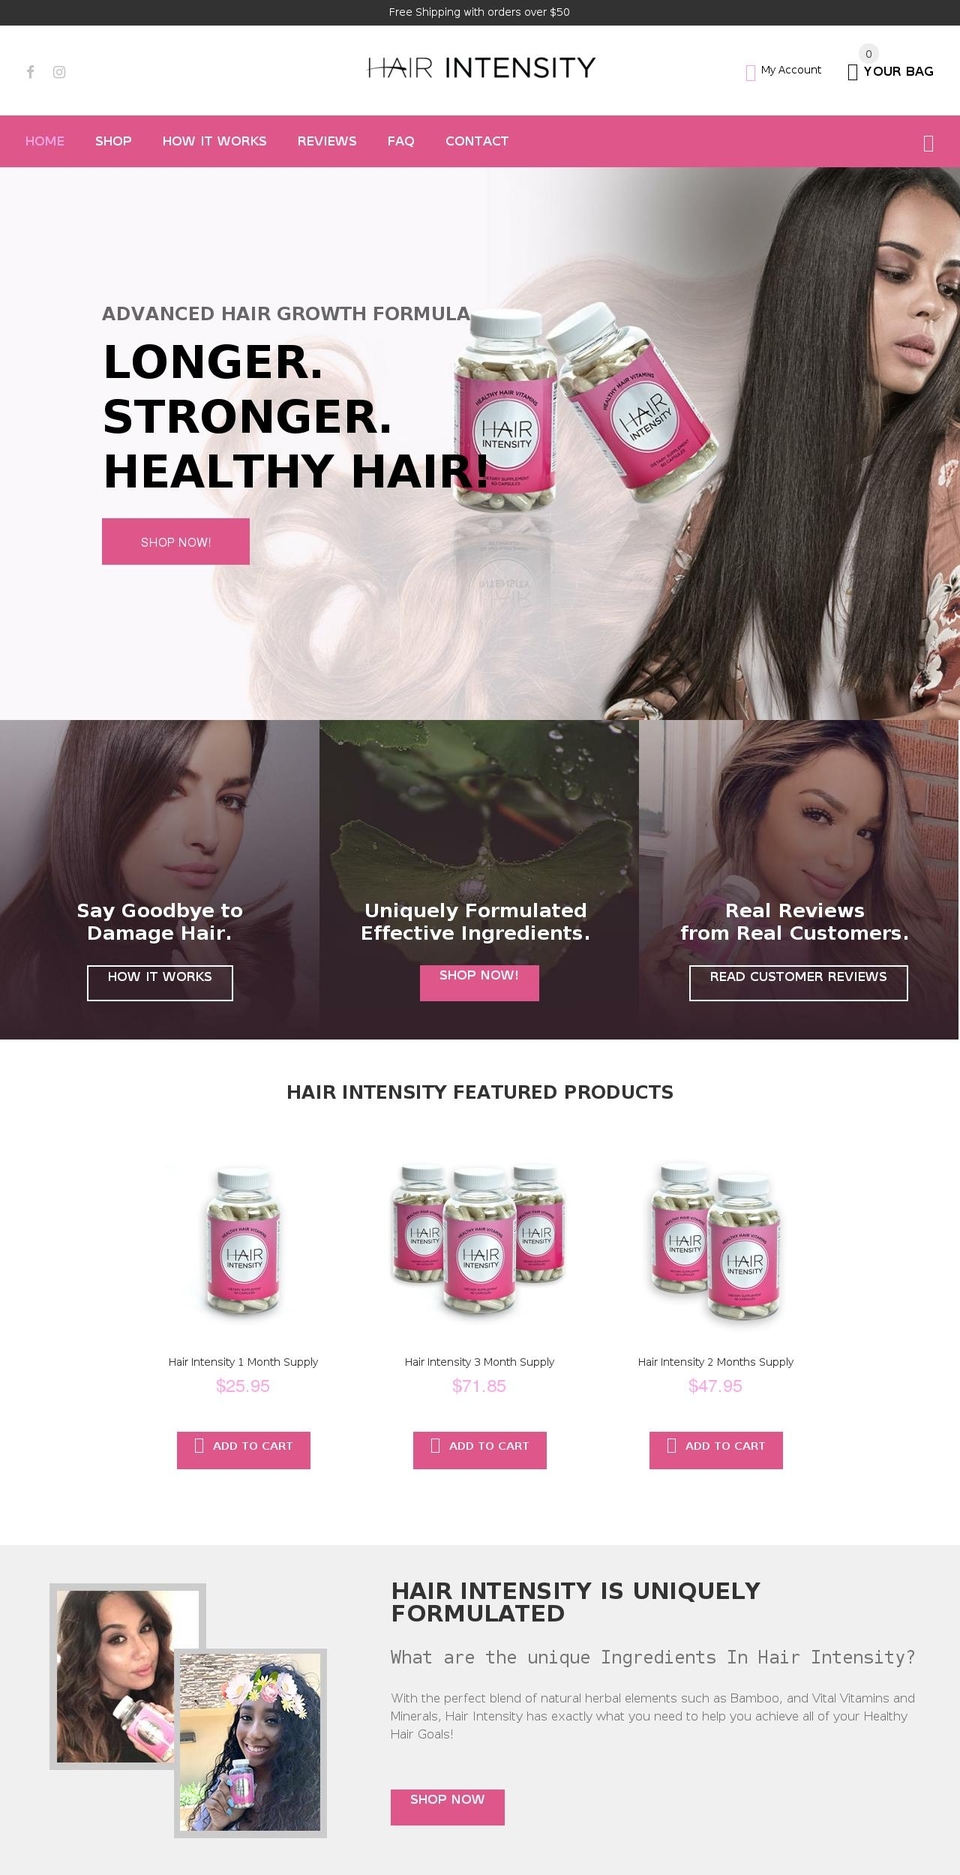 Ooty Shopify theme site example hairintensity.com